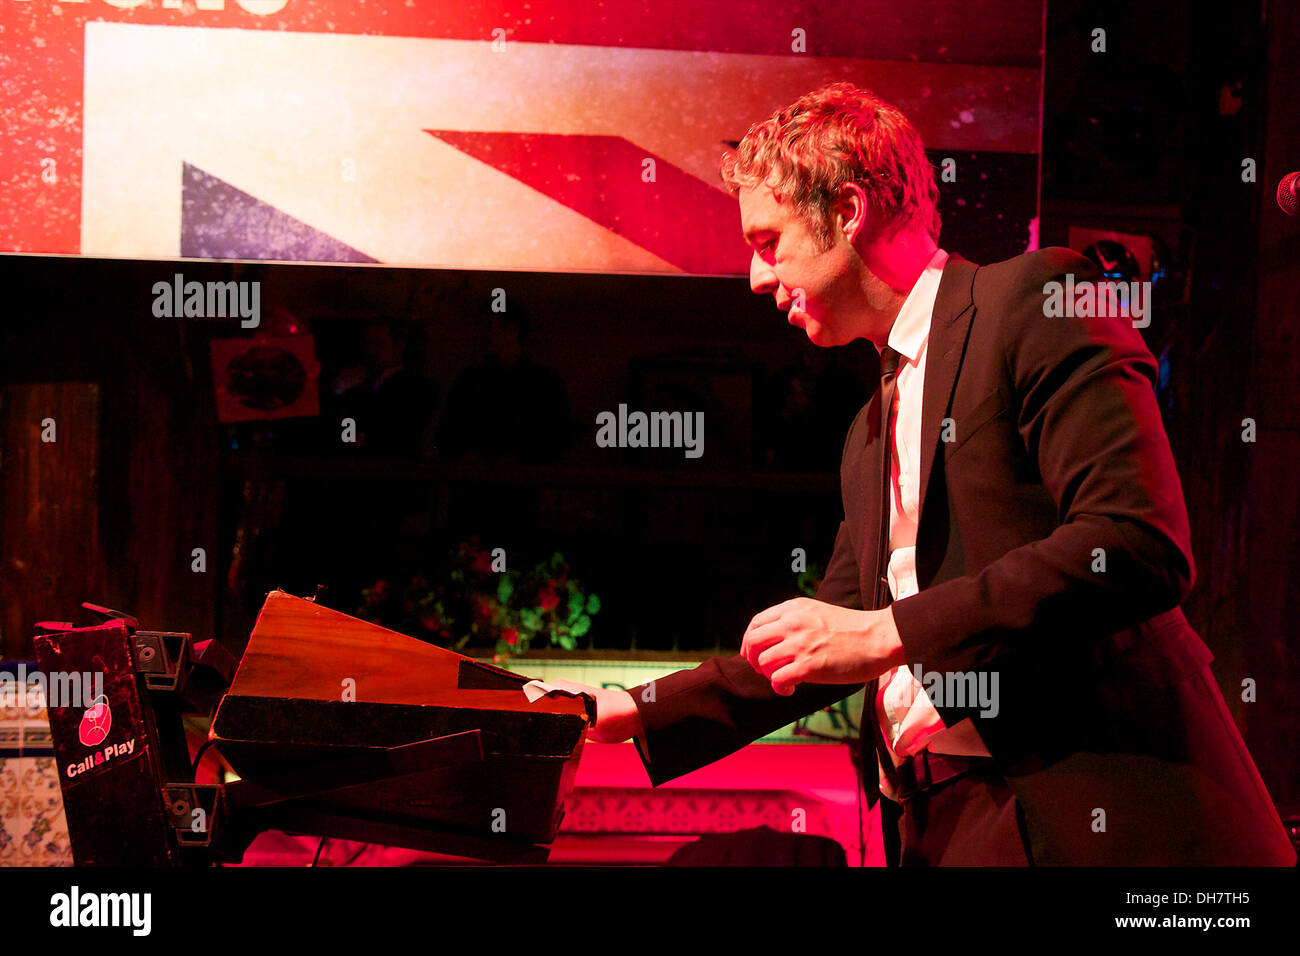 Baxter Dury performs on stage at Beefeater London Sessions Festival at El Corral de la Pacheca Madrid Spain - 20.03.12 Stock Photo